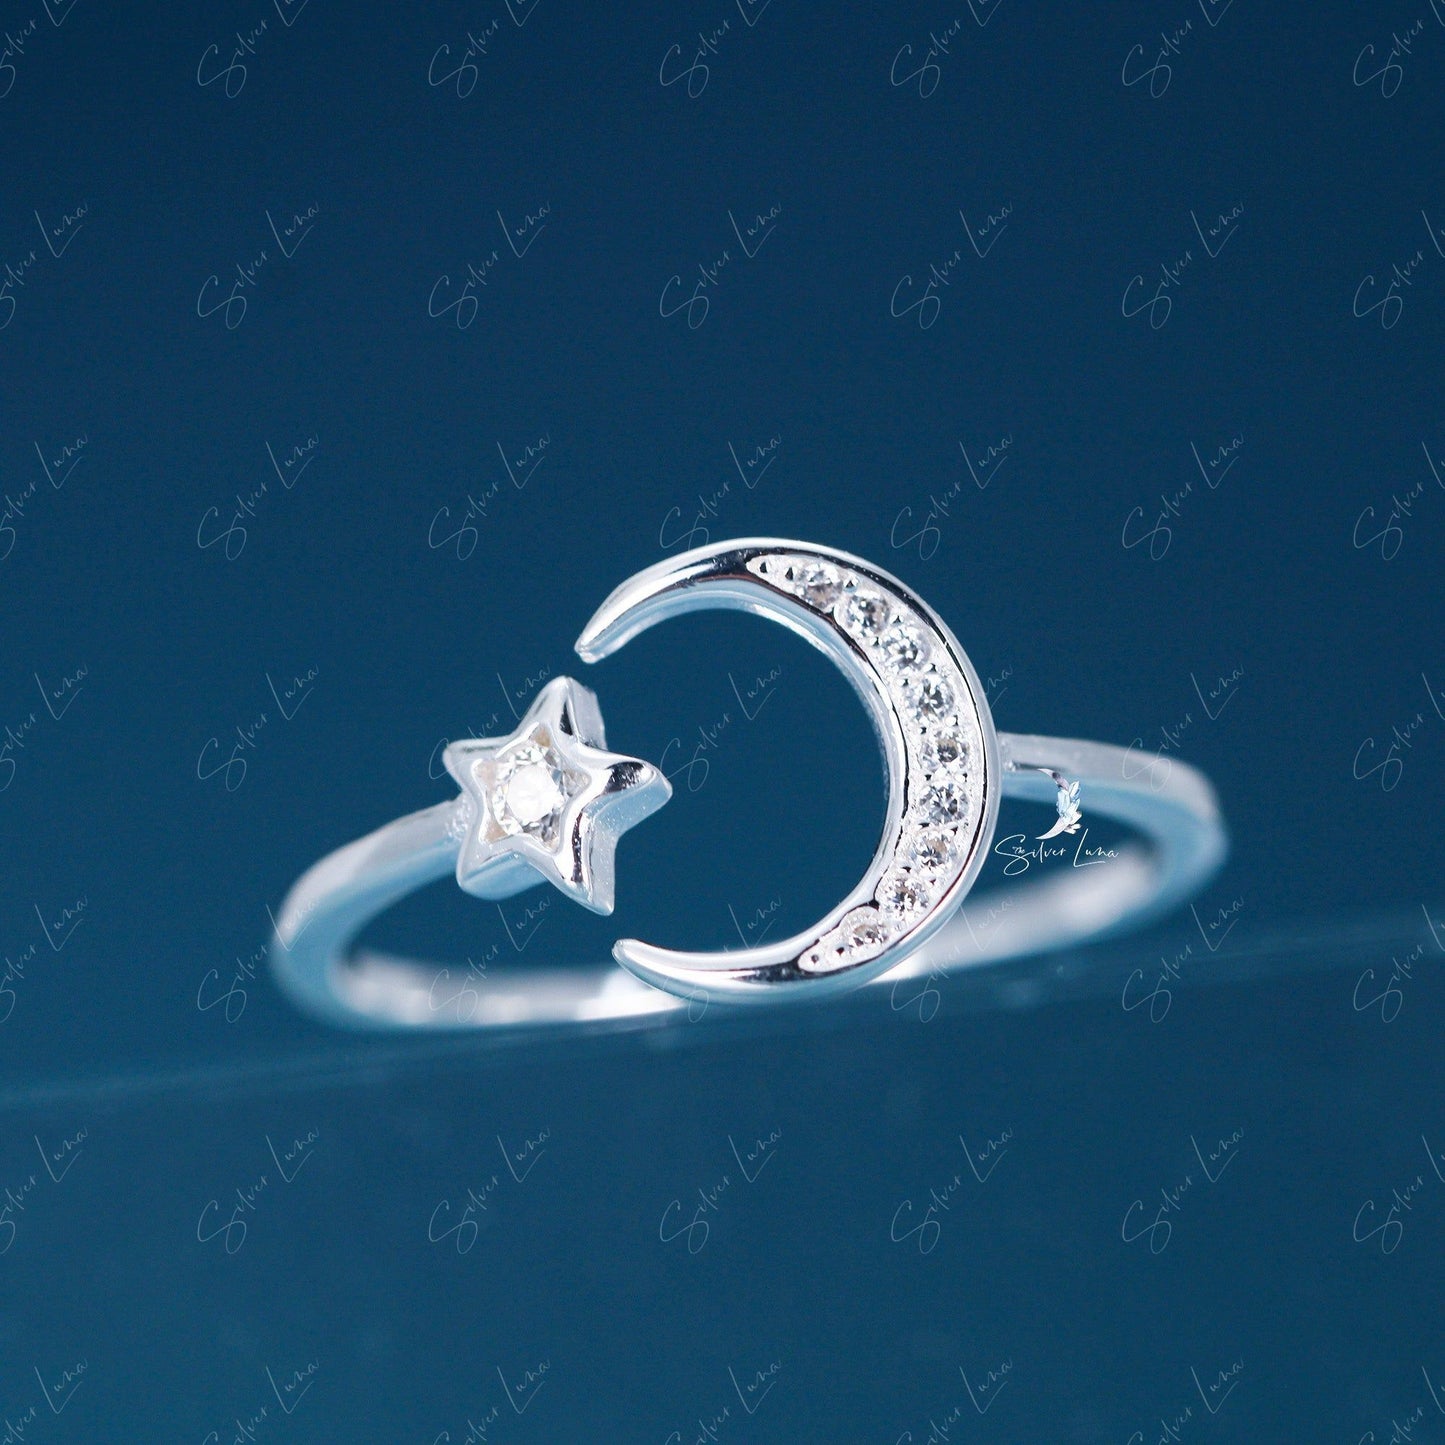 Crescent moon and star adjustable ring